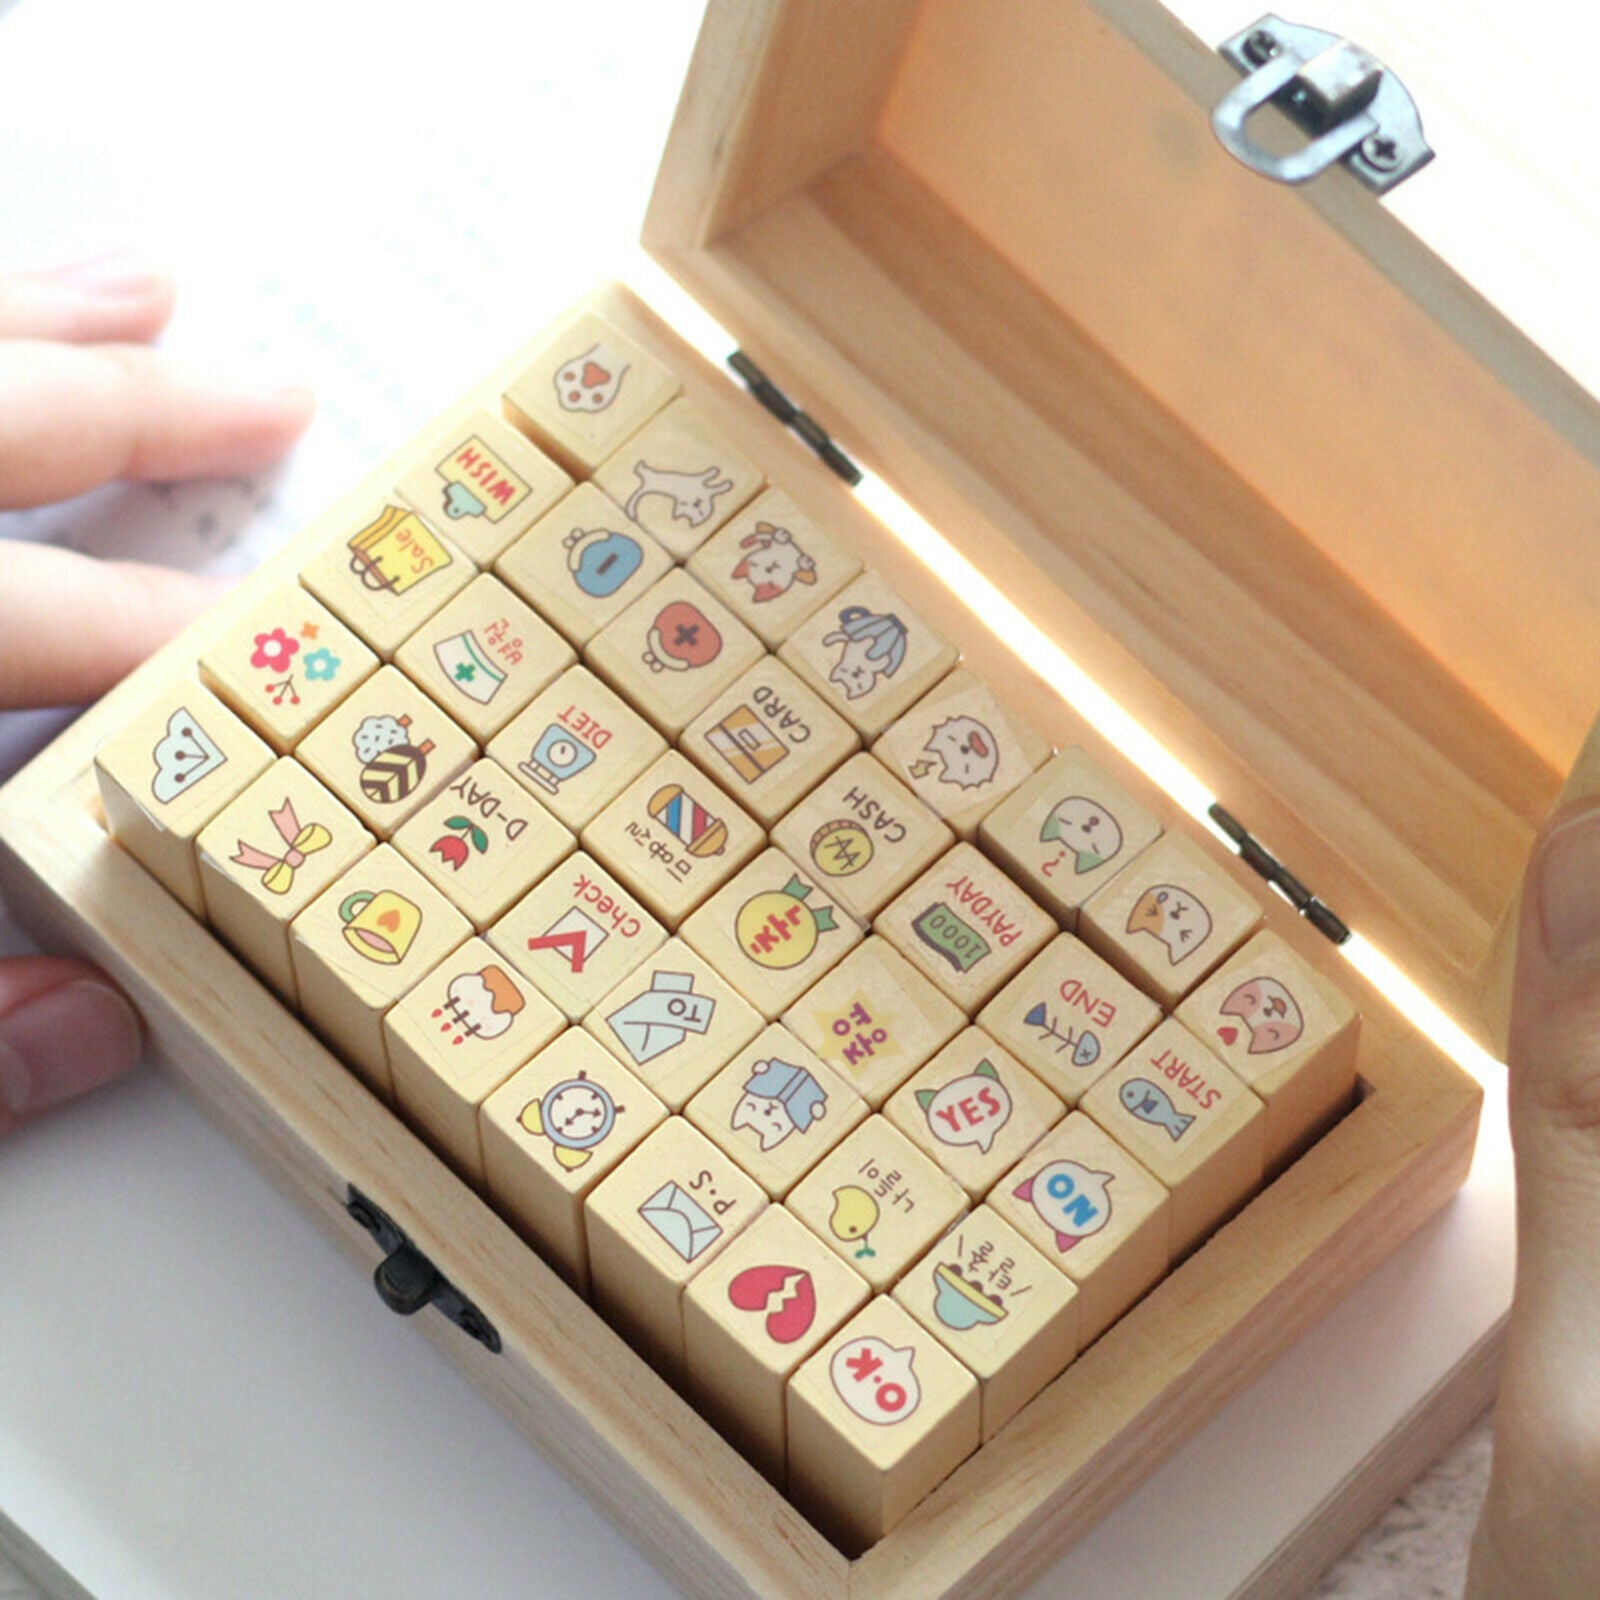 40 PIECES RUBBER CARTOON STAMP CATS WOODEN BOX SET, Invitation Cards,